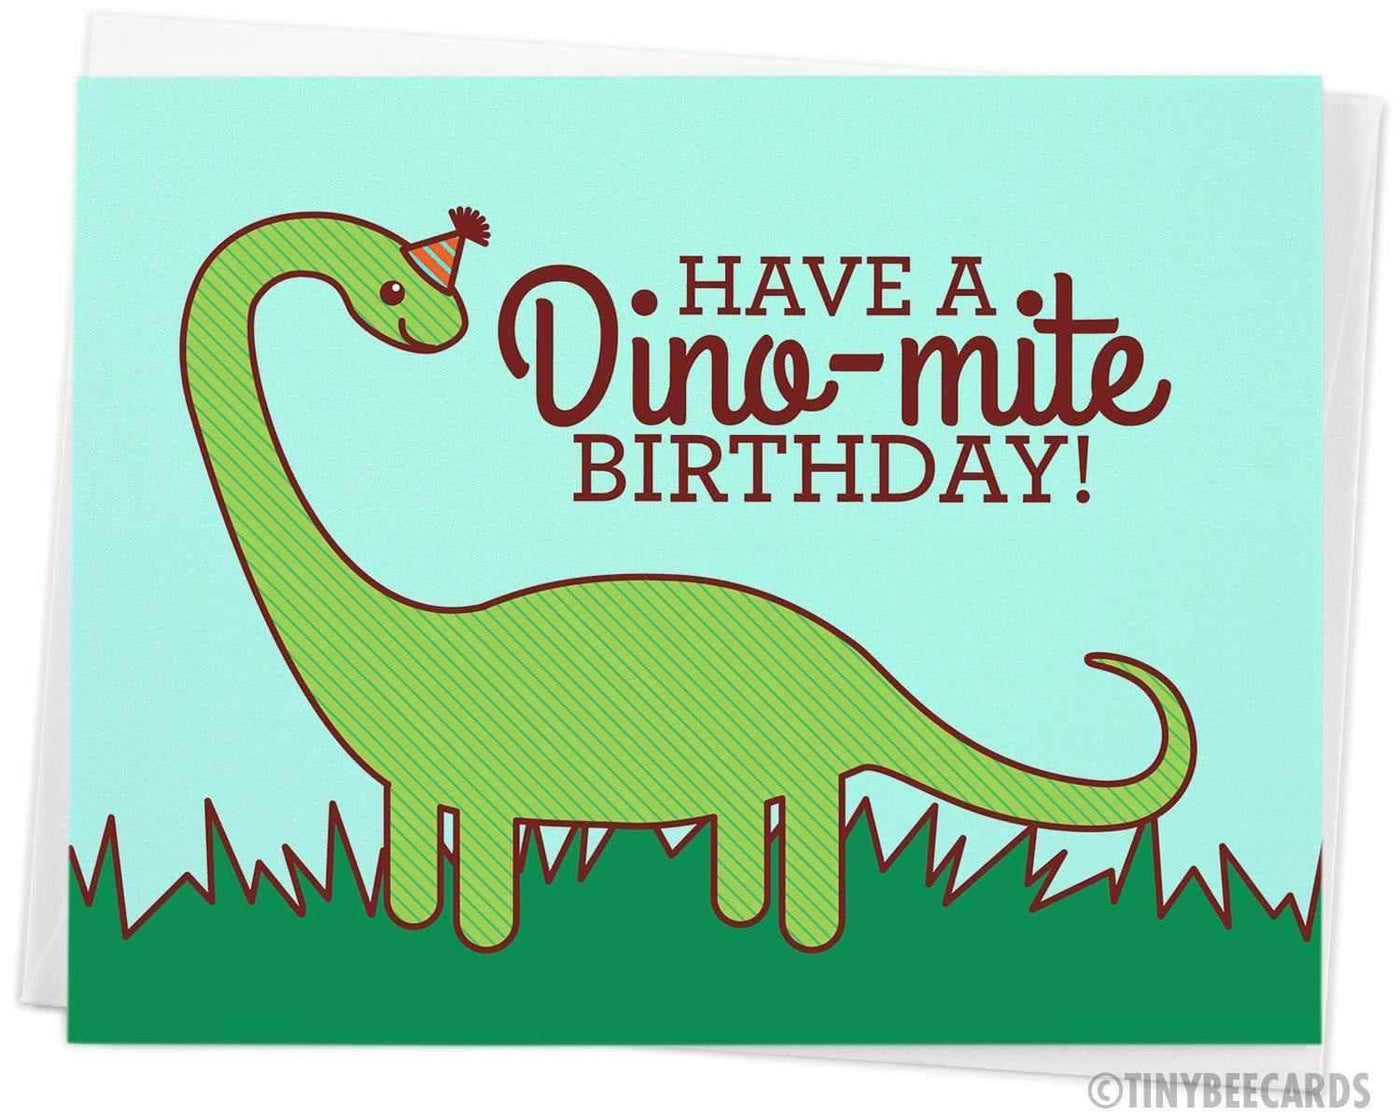 "Have a Dino-mite Birthday!" | Birthday Card - Tiny Bee Cards - The Sock Monster